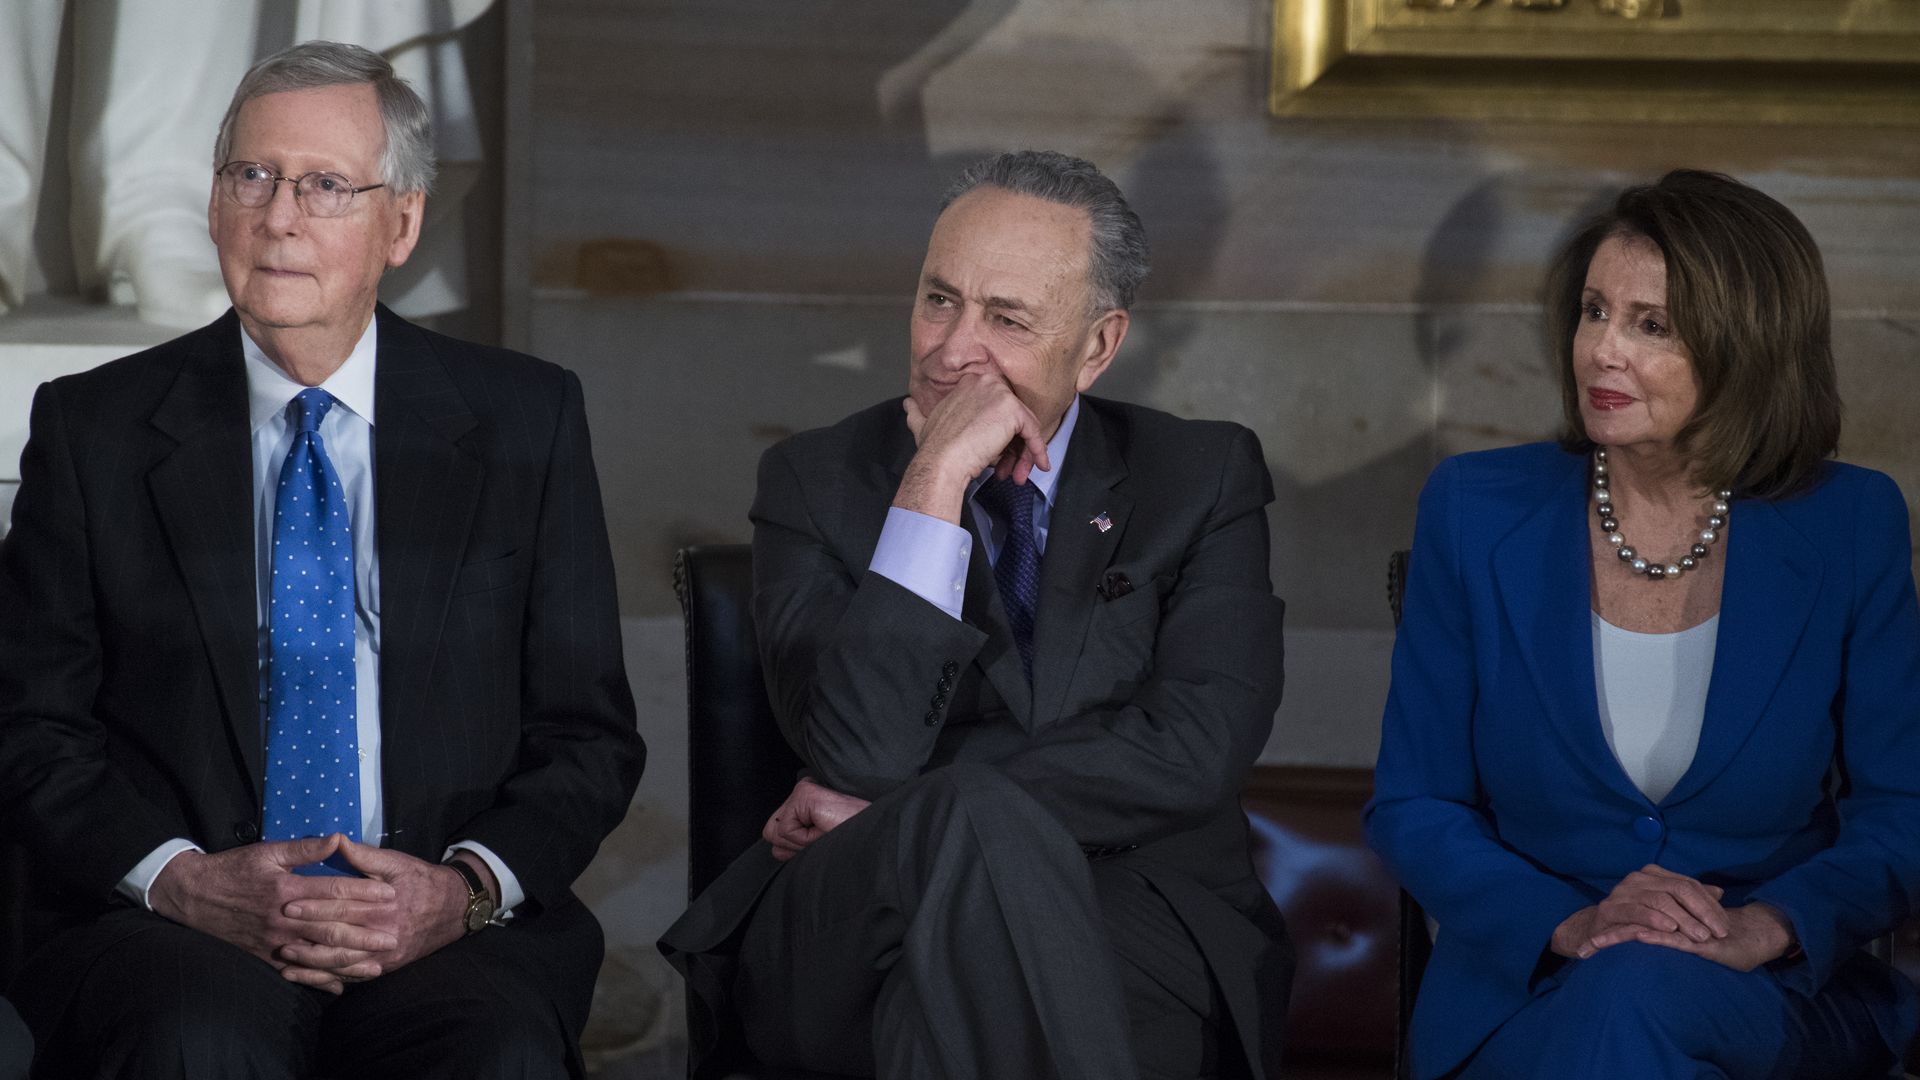 McConnell, Pelosi and Schumer